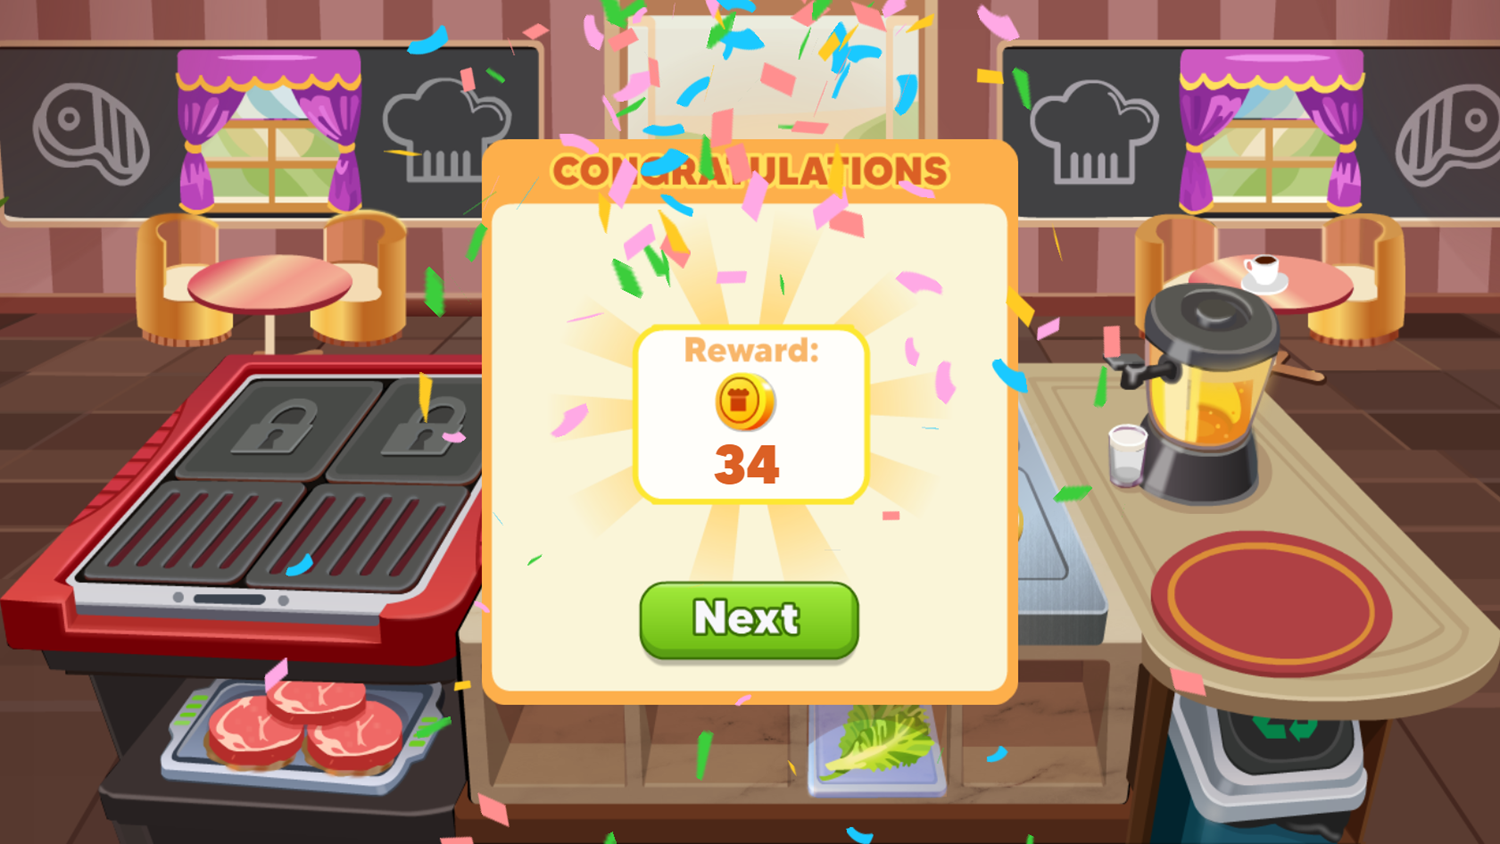 Cooking Street Game Level Complete Screenshot.